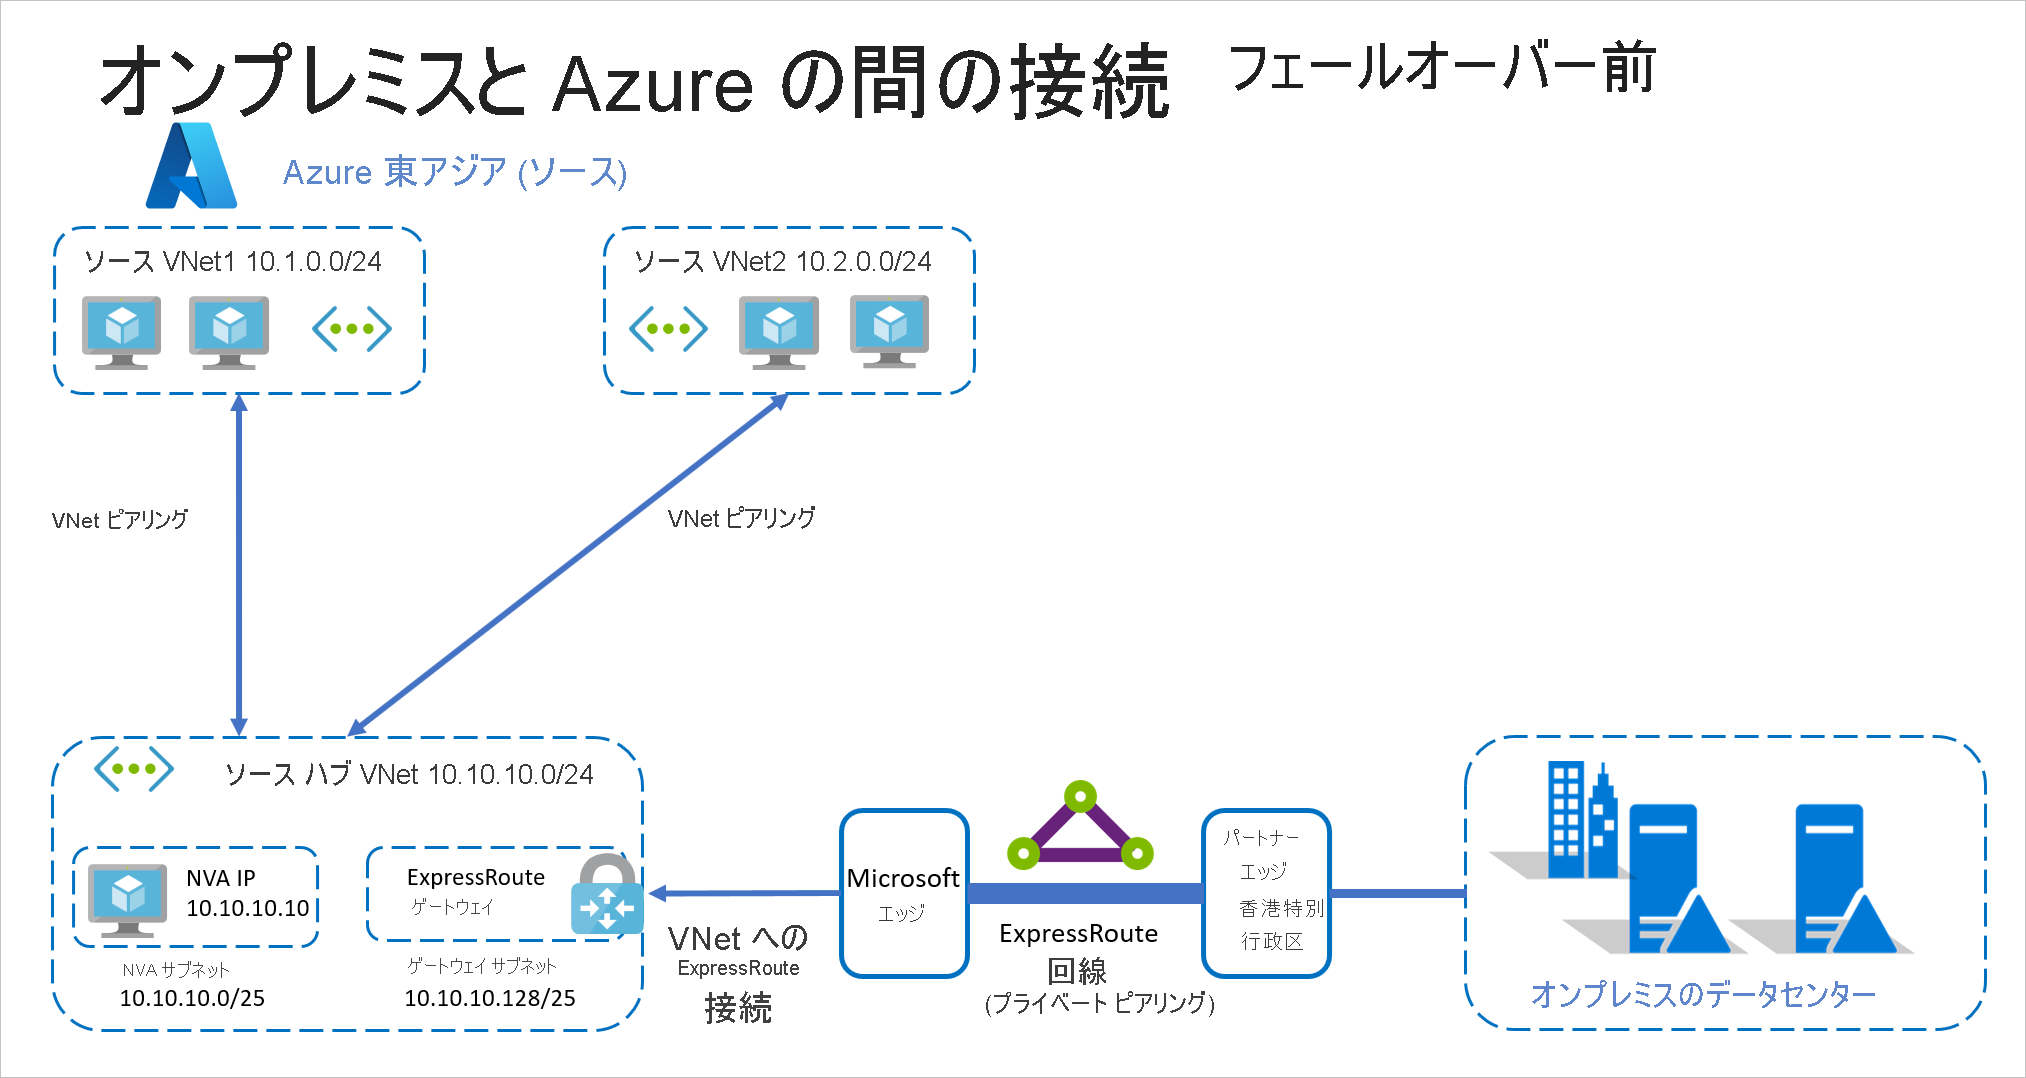 On-premises-to-Azure with ExpressRoute before failover